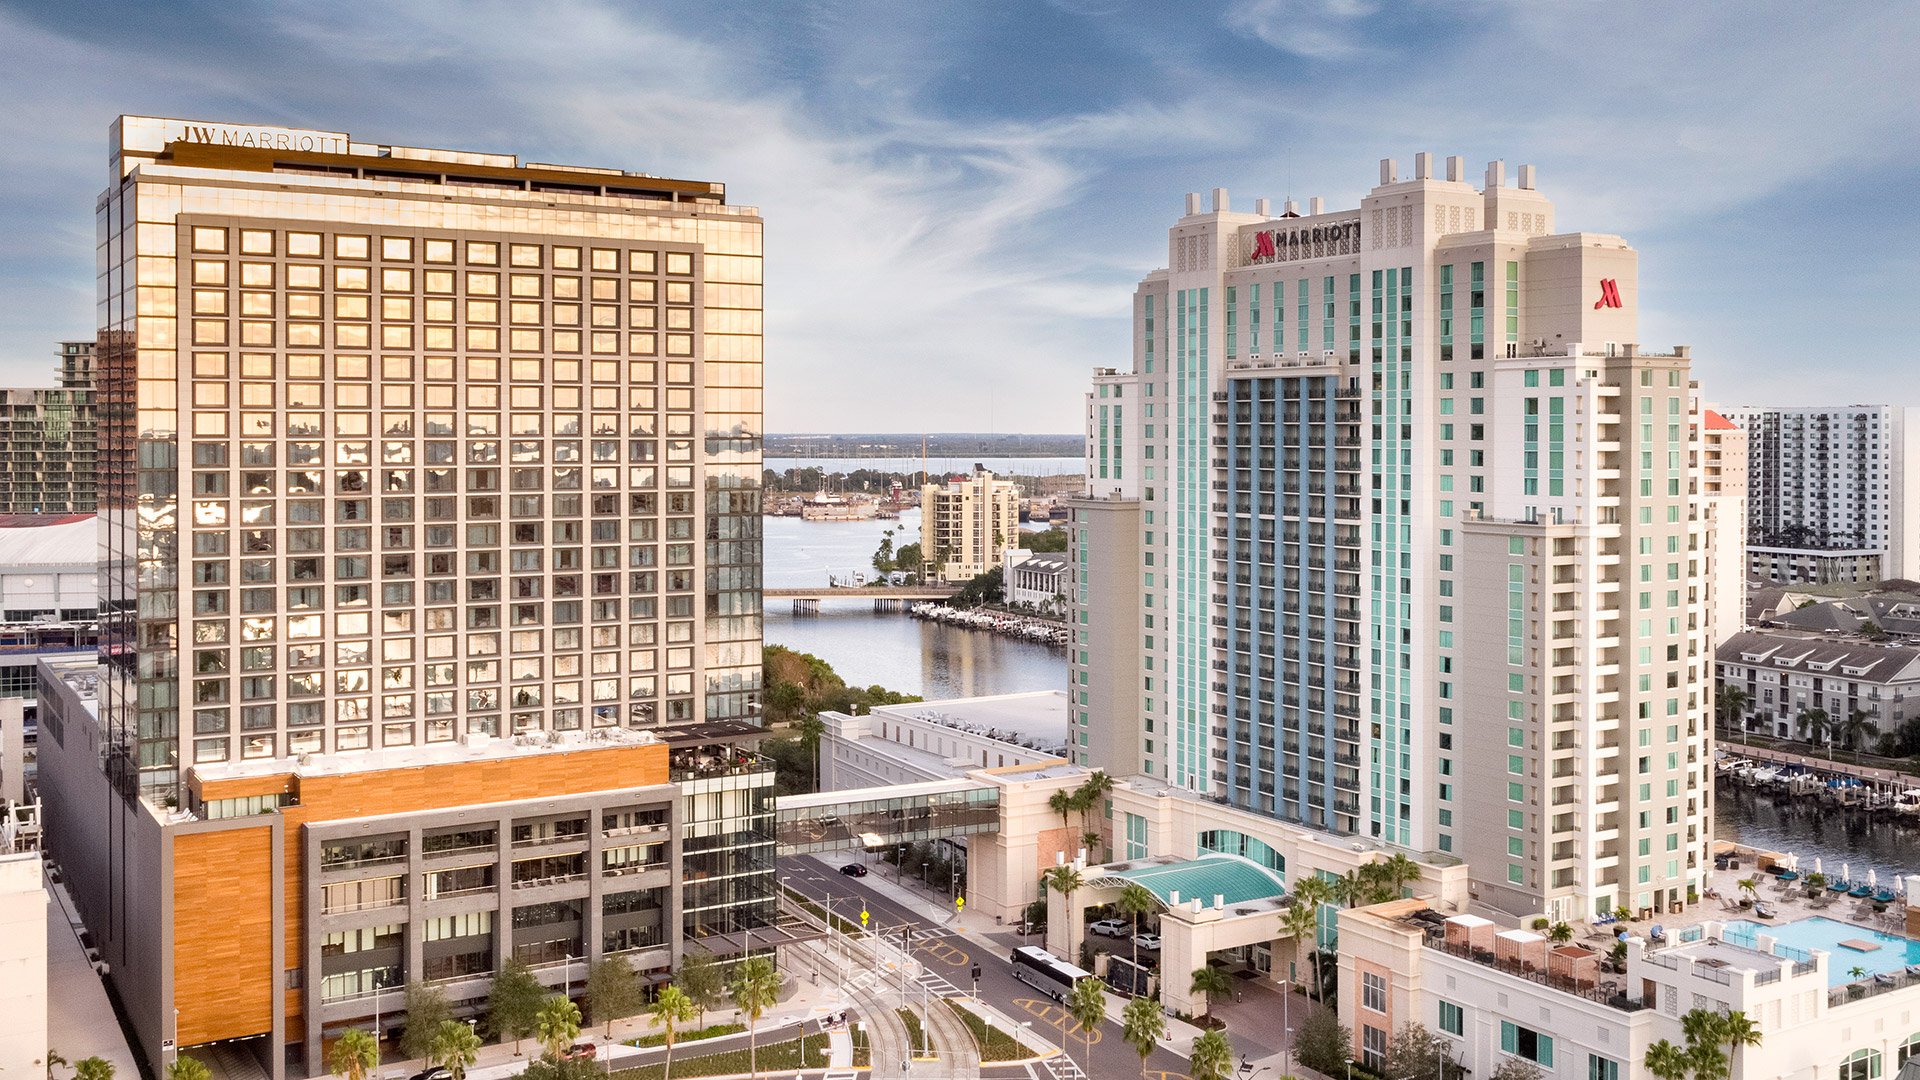 Tampa Hotels in Florida | Marriott Water Street Tampa Collection